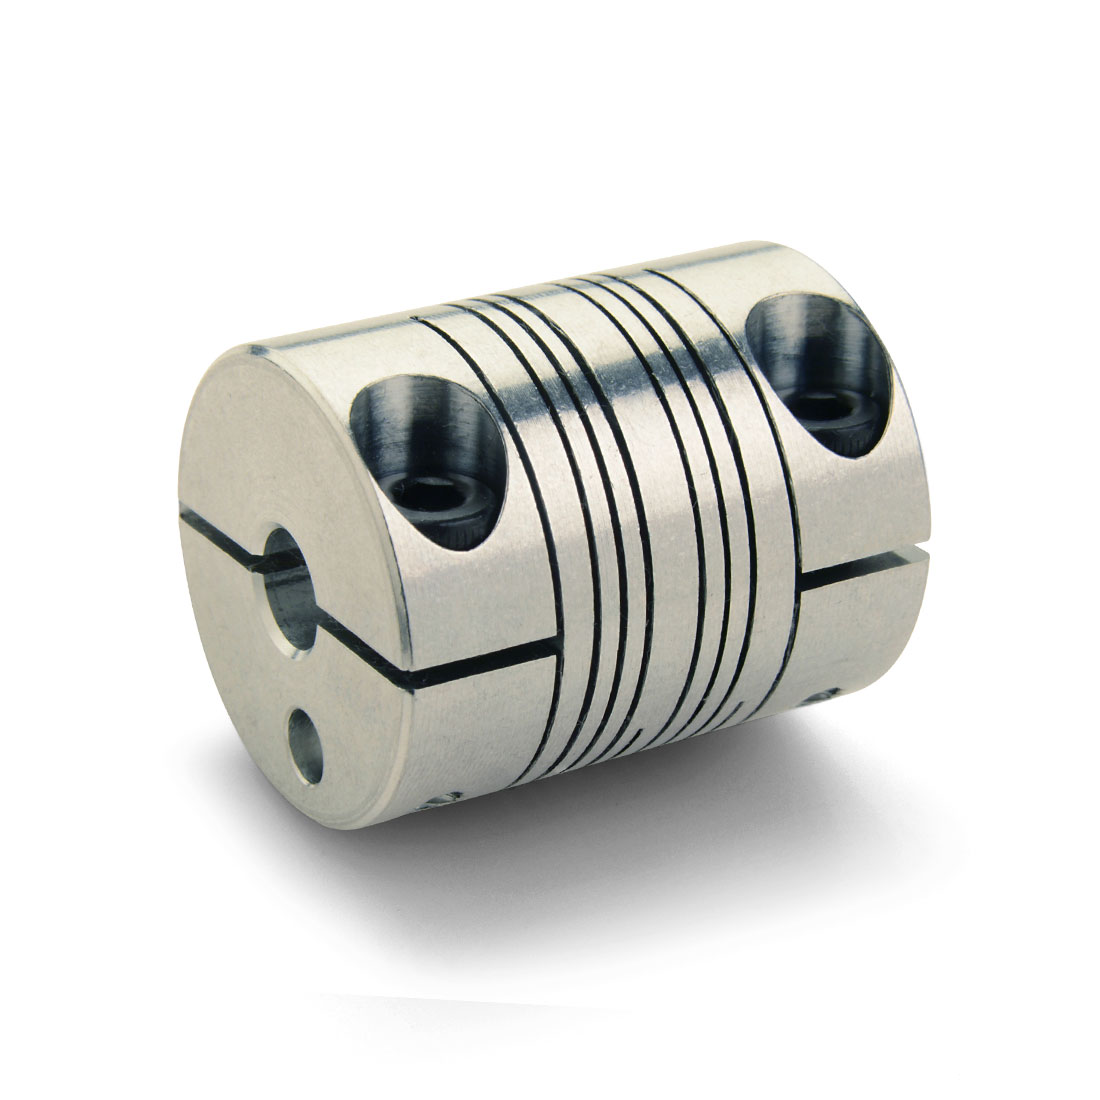 50.8 mm OD Ruland MBC51-25-25-A 2024 or 7075 Aluminum Hubs Bellows Coupling 25 mm x 25 mm Bores Clamp Style 58.7 mm Length